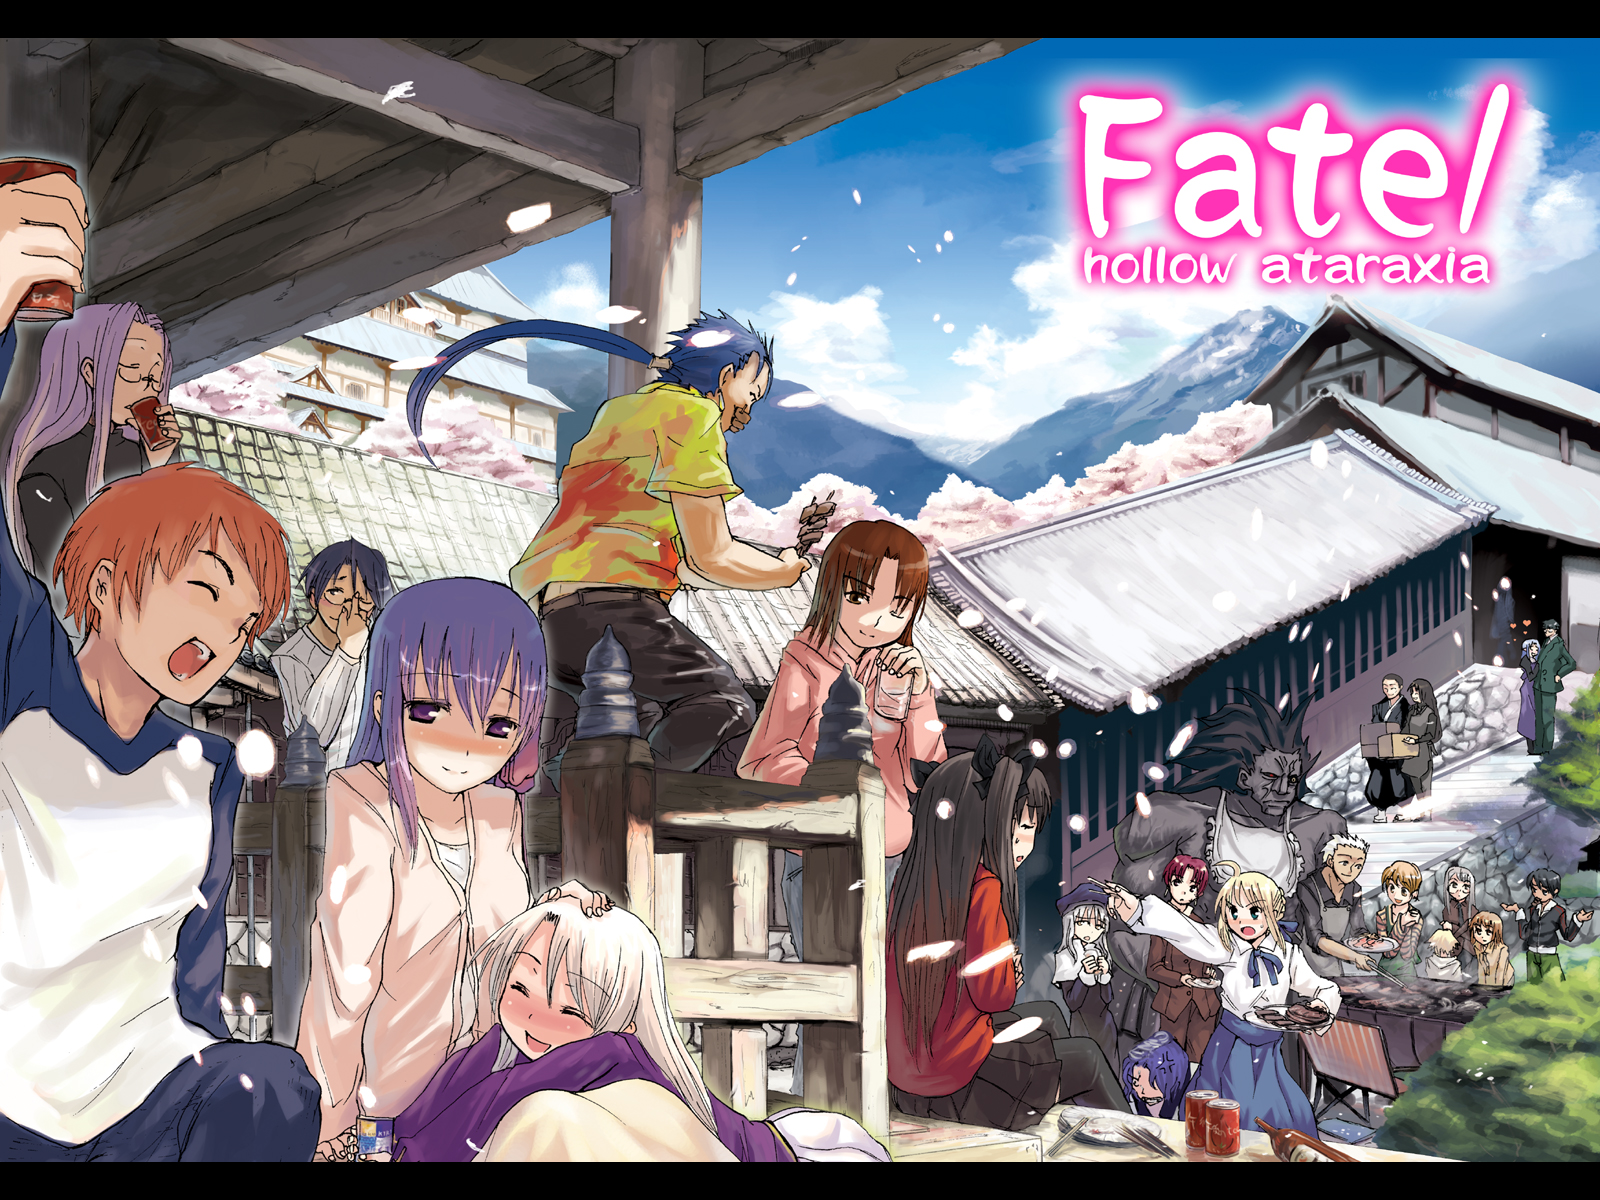 Amazing Fate Hollow Ataraxia Pictures & Backgrounds